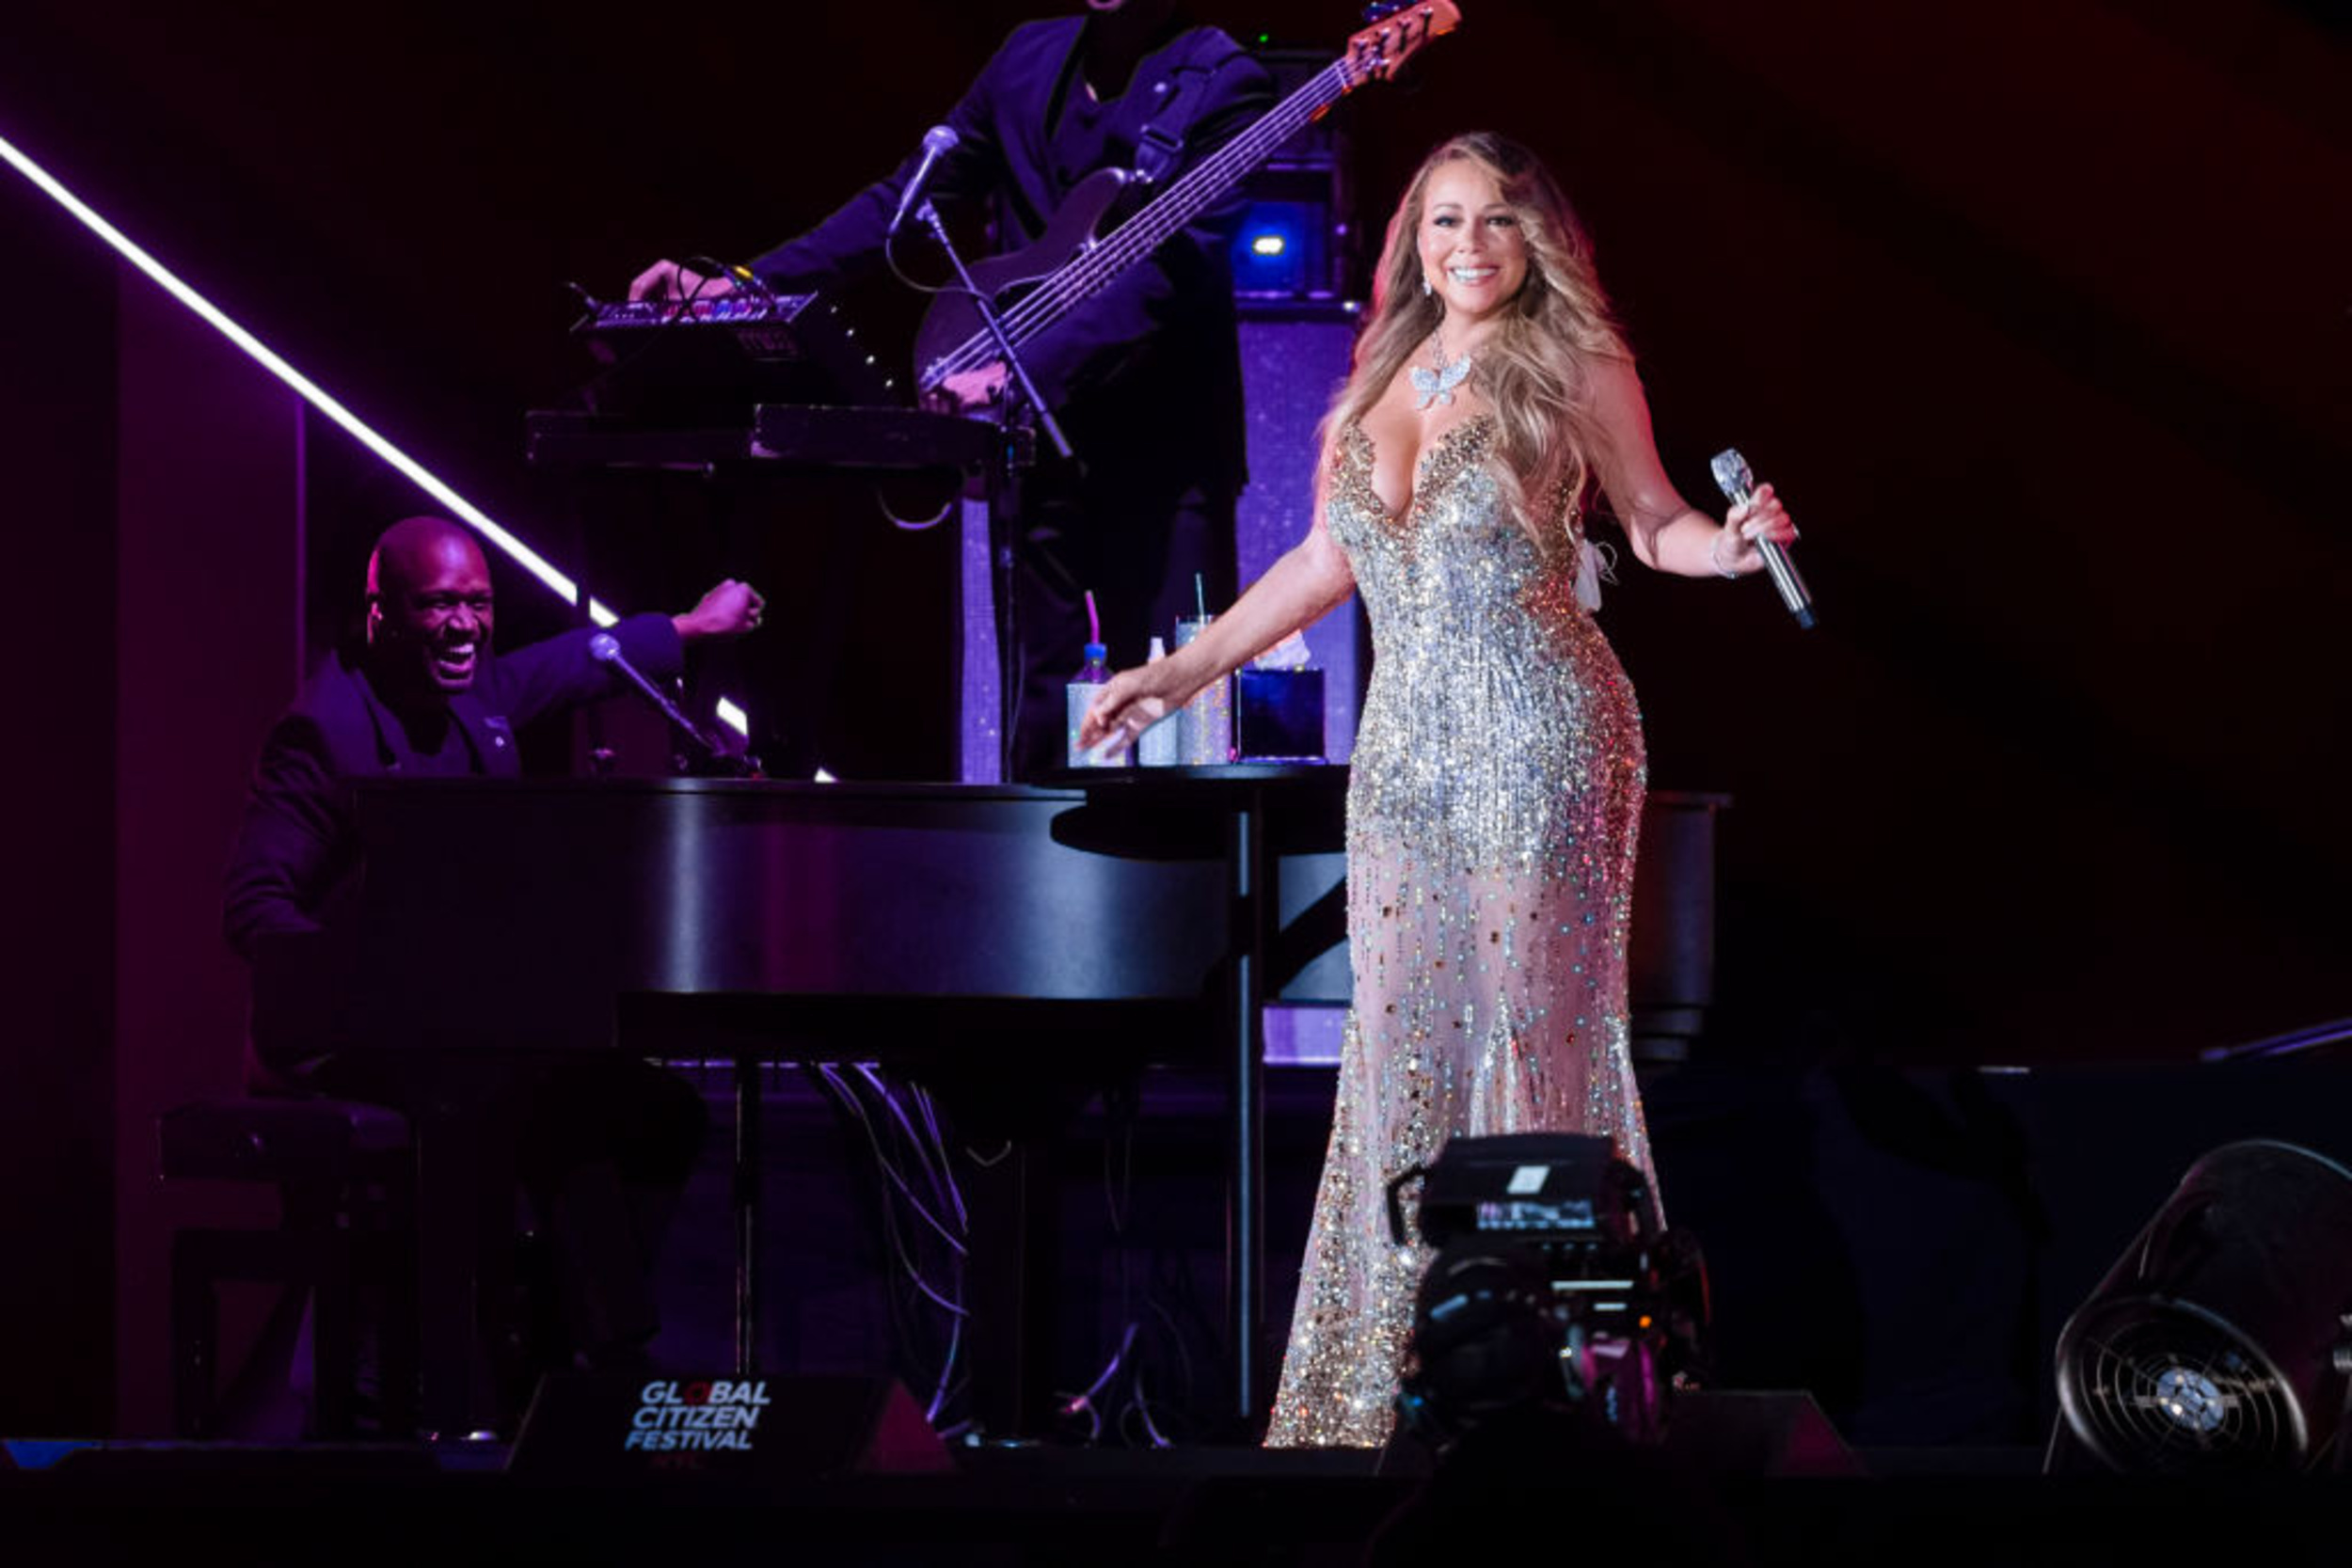 <p>Mariah Carey’s 1995 hit single “Fantasy” tells the story of woman who’s crushing on a potential partner, and every time she sees him, she fantasizes about being with him. The smooth sample of Tom Tom Club’s 1981 hit song “Genius of Love,” helps give the song a vibrant and feel-good vibe on the production, which helps give listeners hope that Carey’s fantasy will become reality. </p><p>You may also like: <a href='https://www.yardbarker.com/entertainment/articles/women_who_shaped_millennial_feminists_040824/s1__38887376'>Women who shaped millennial feminists</a></p>